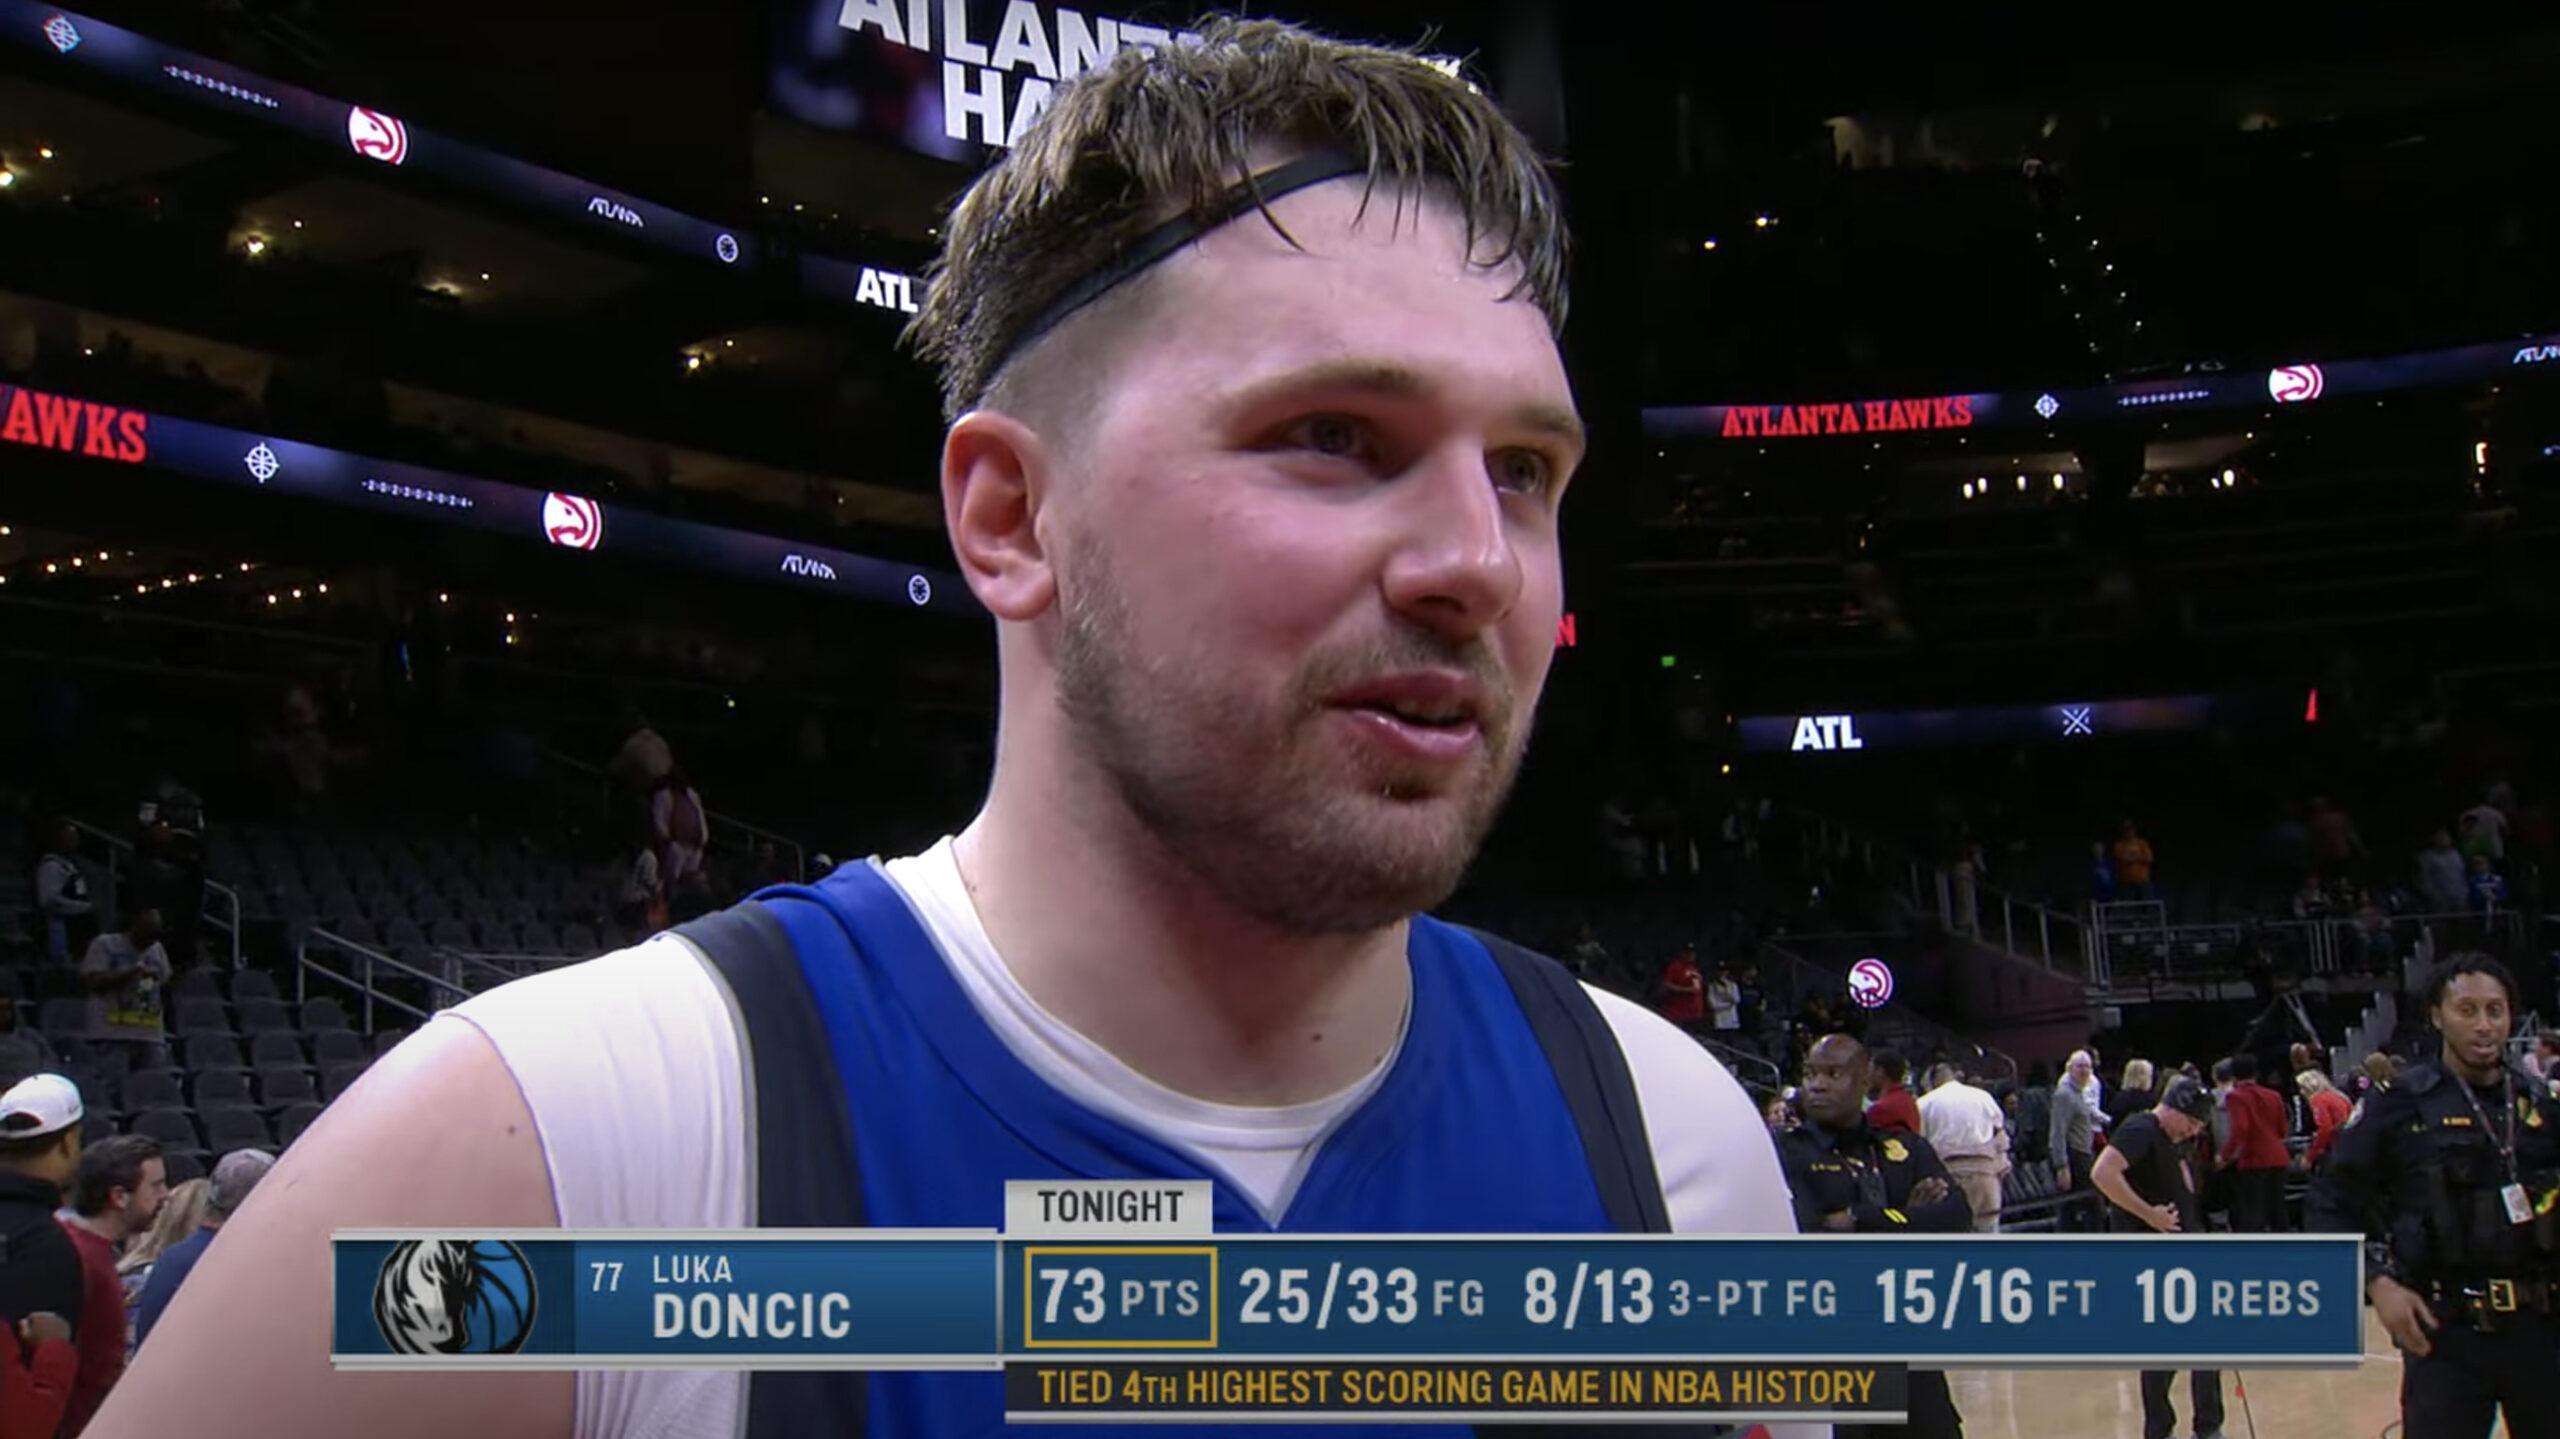 Luka Doncic 73 points